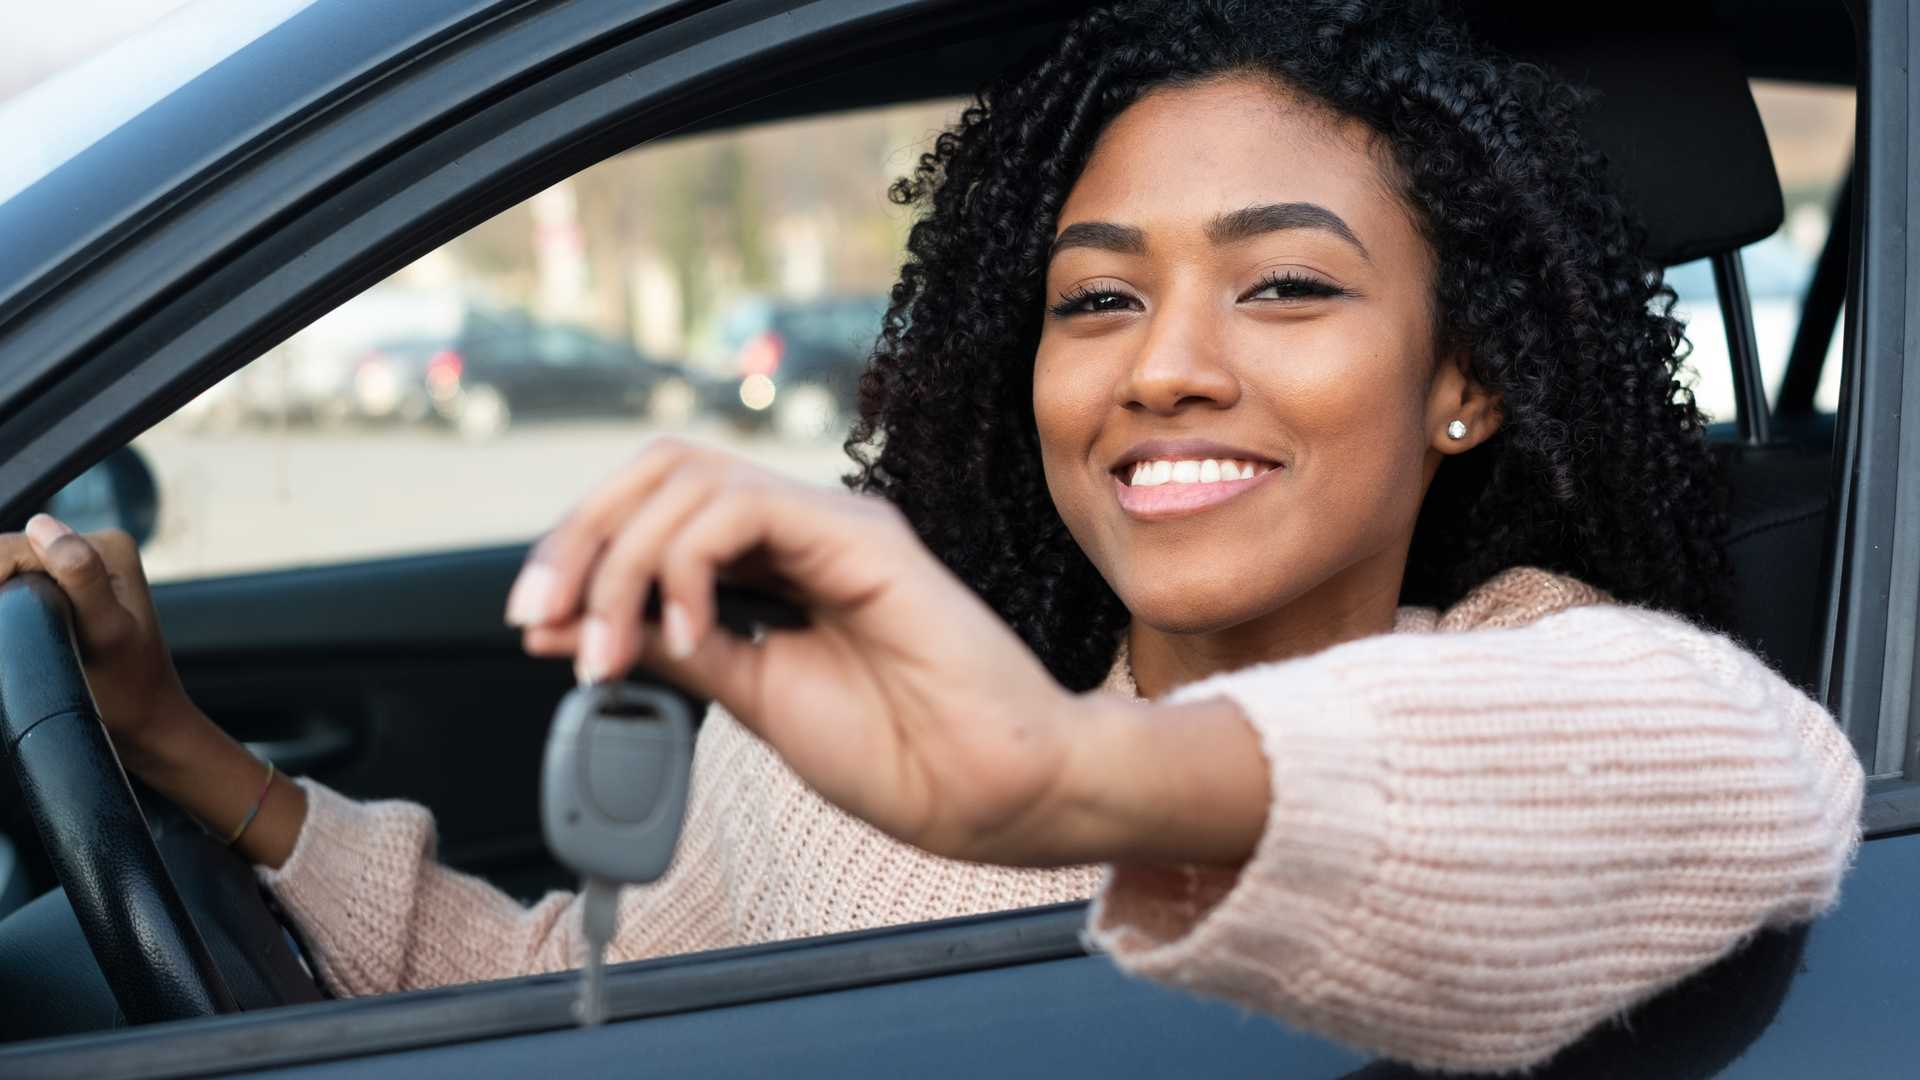 2020 Guide To Car Insurance For 19 Year Olds intended for dimensions 1920 X 1080